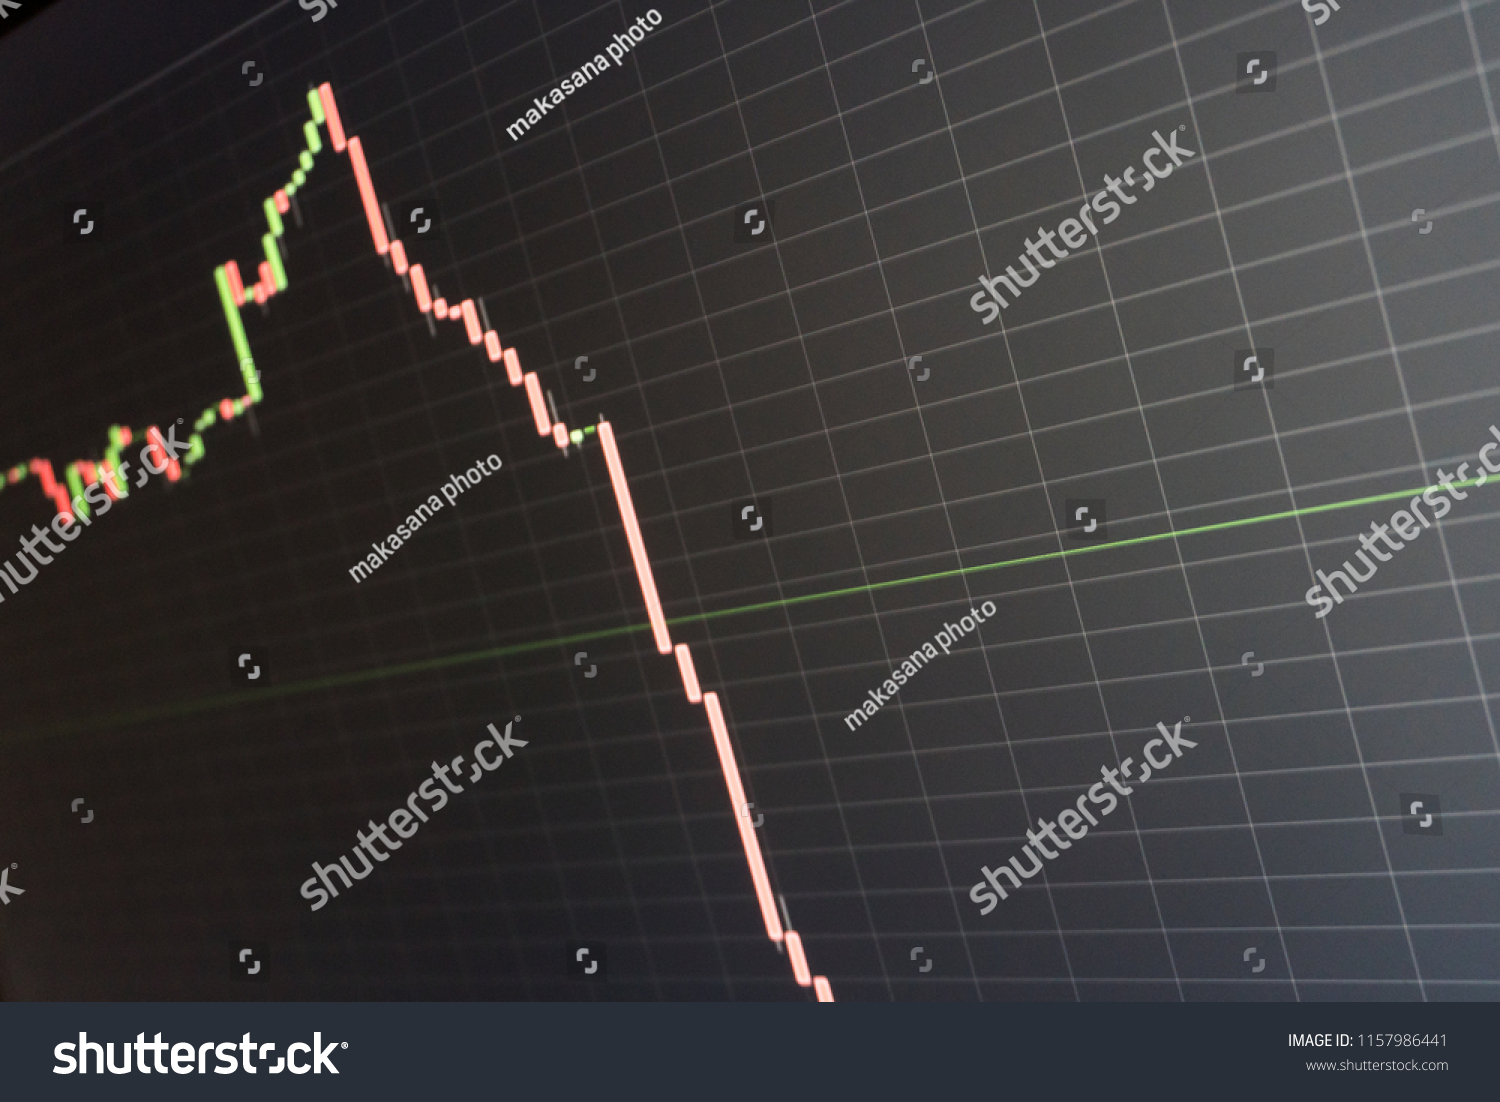 A stock market candlestick chart showing a sharply declining and crashing price going deep into the red #1157986441